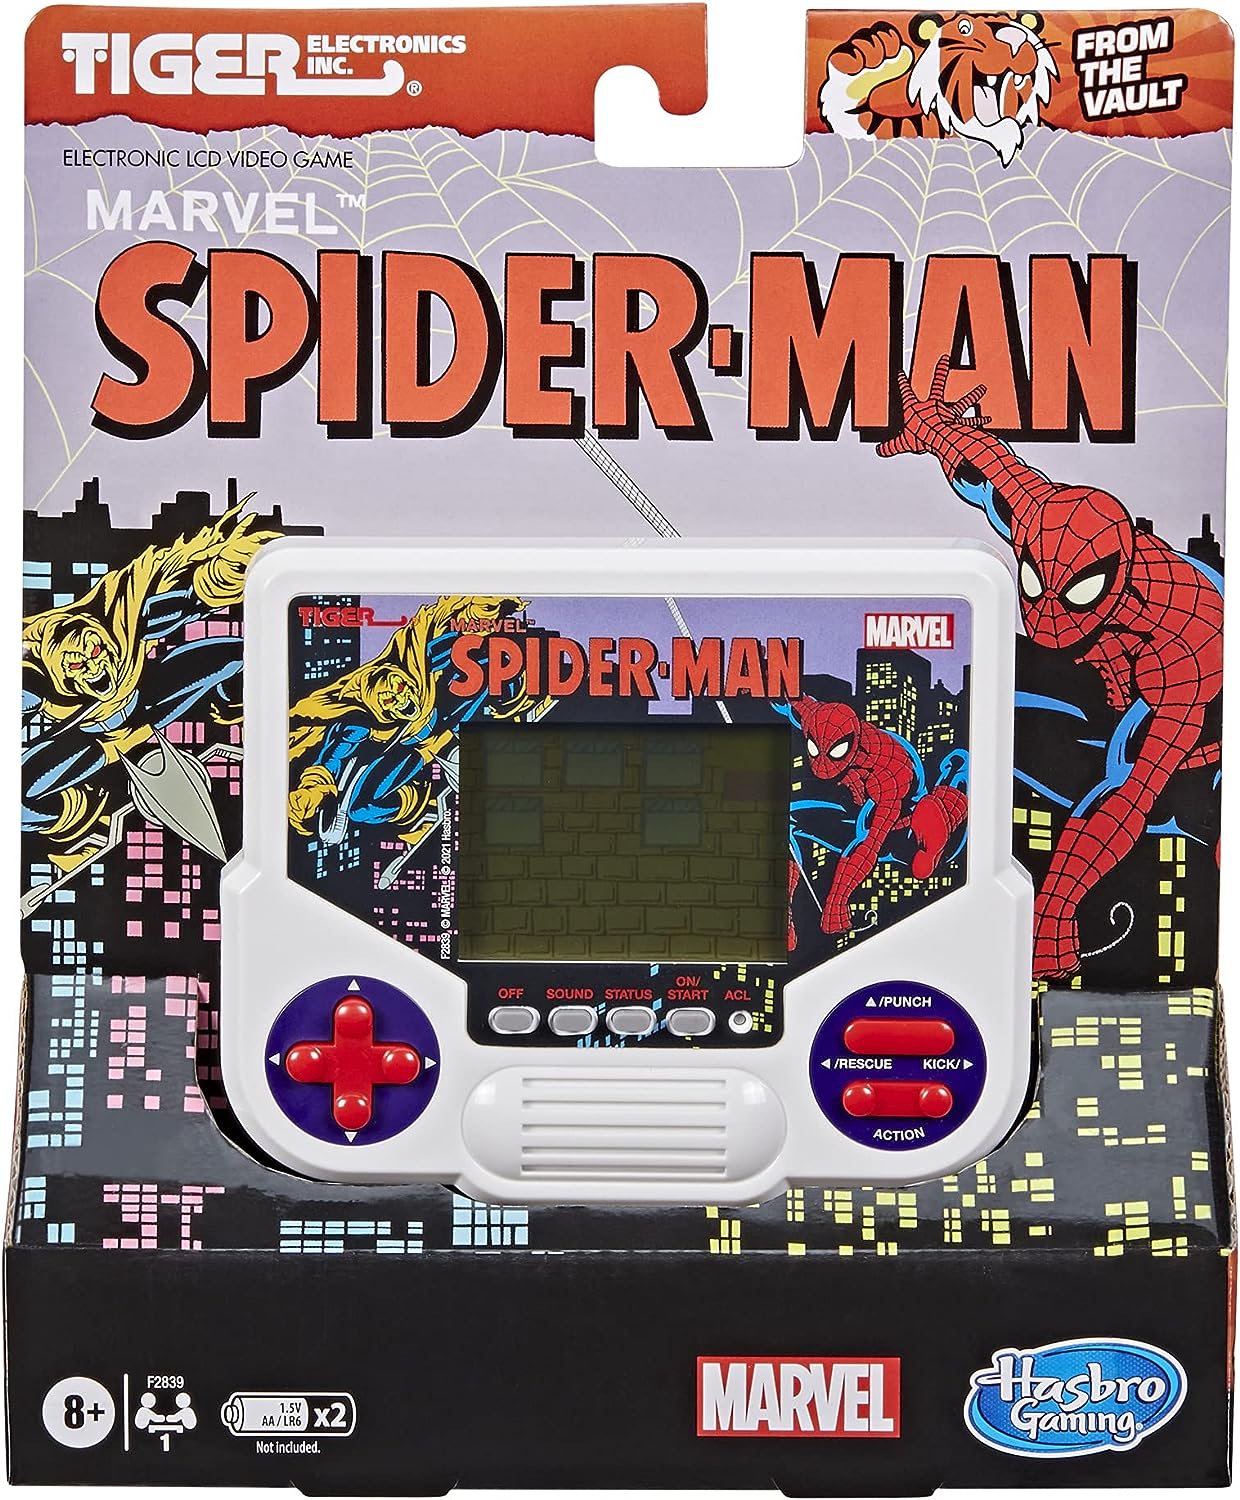 Tiger Electronics Marvel Spider-Man Electronic LCD Video Game, Retro-Inspired 1-Player Handheld Game, Ages 8 and Up